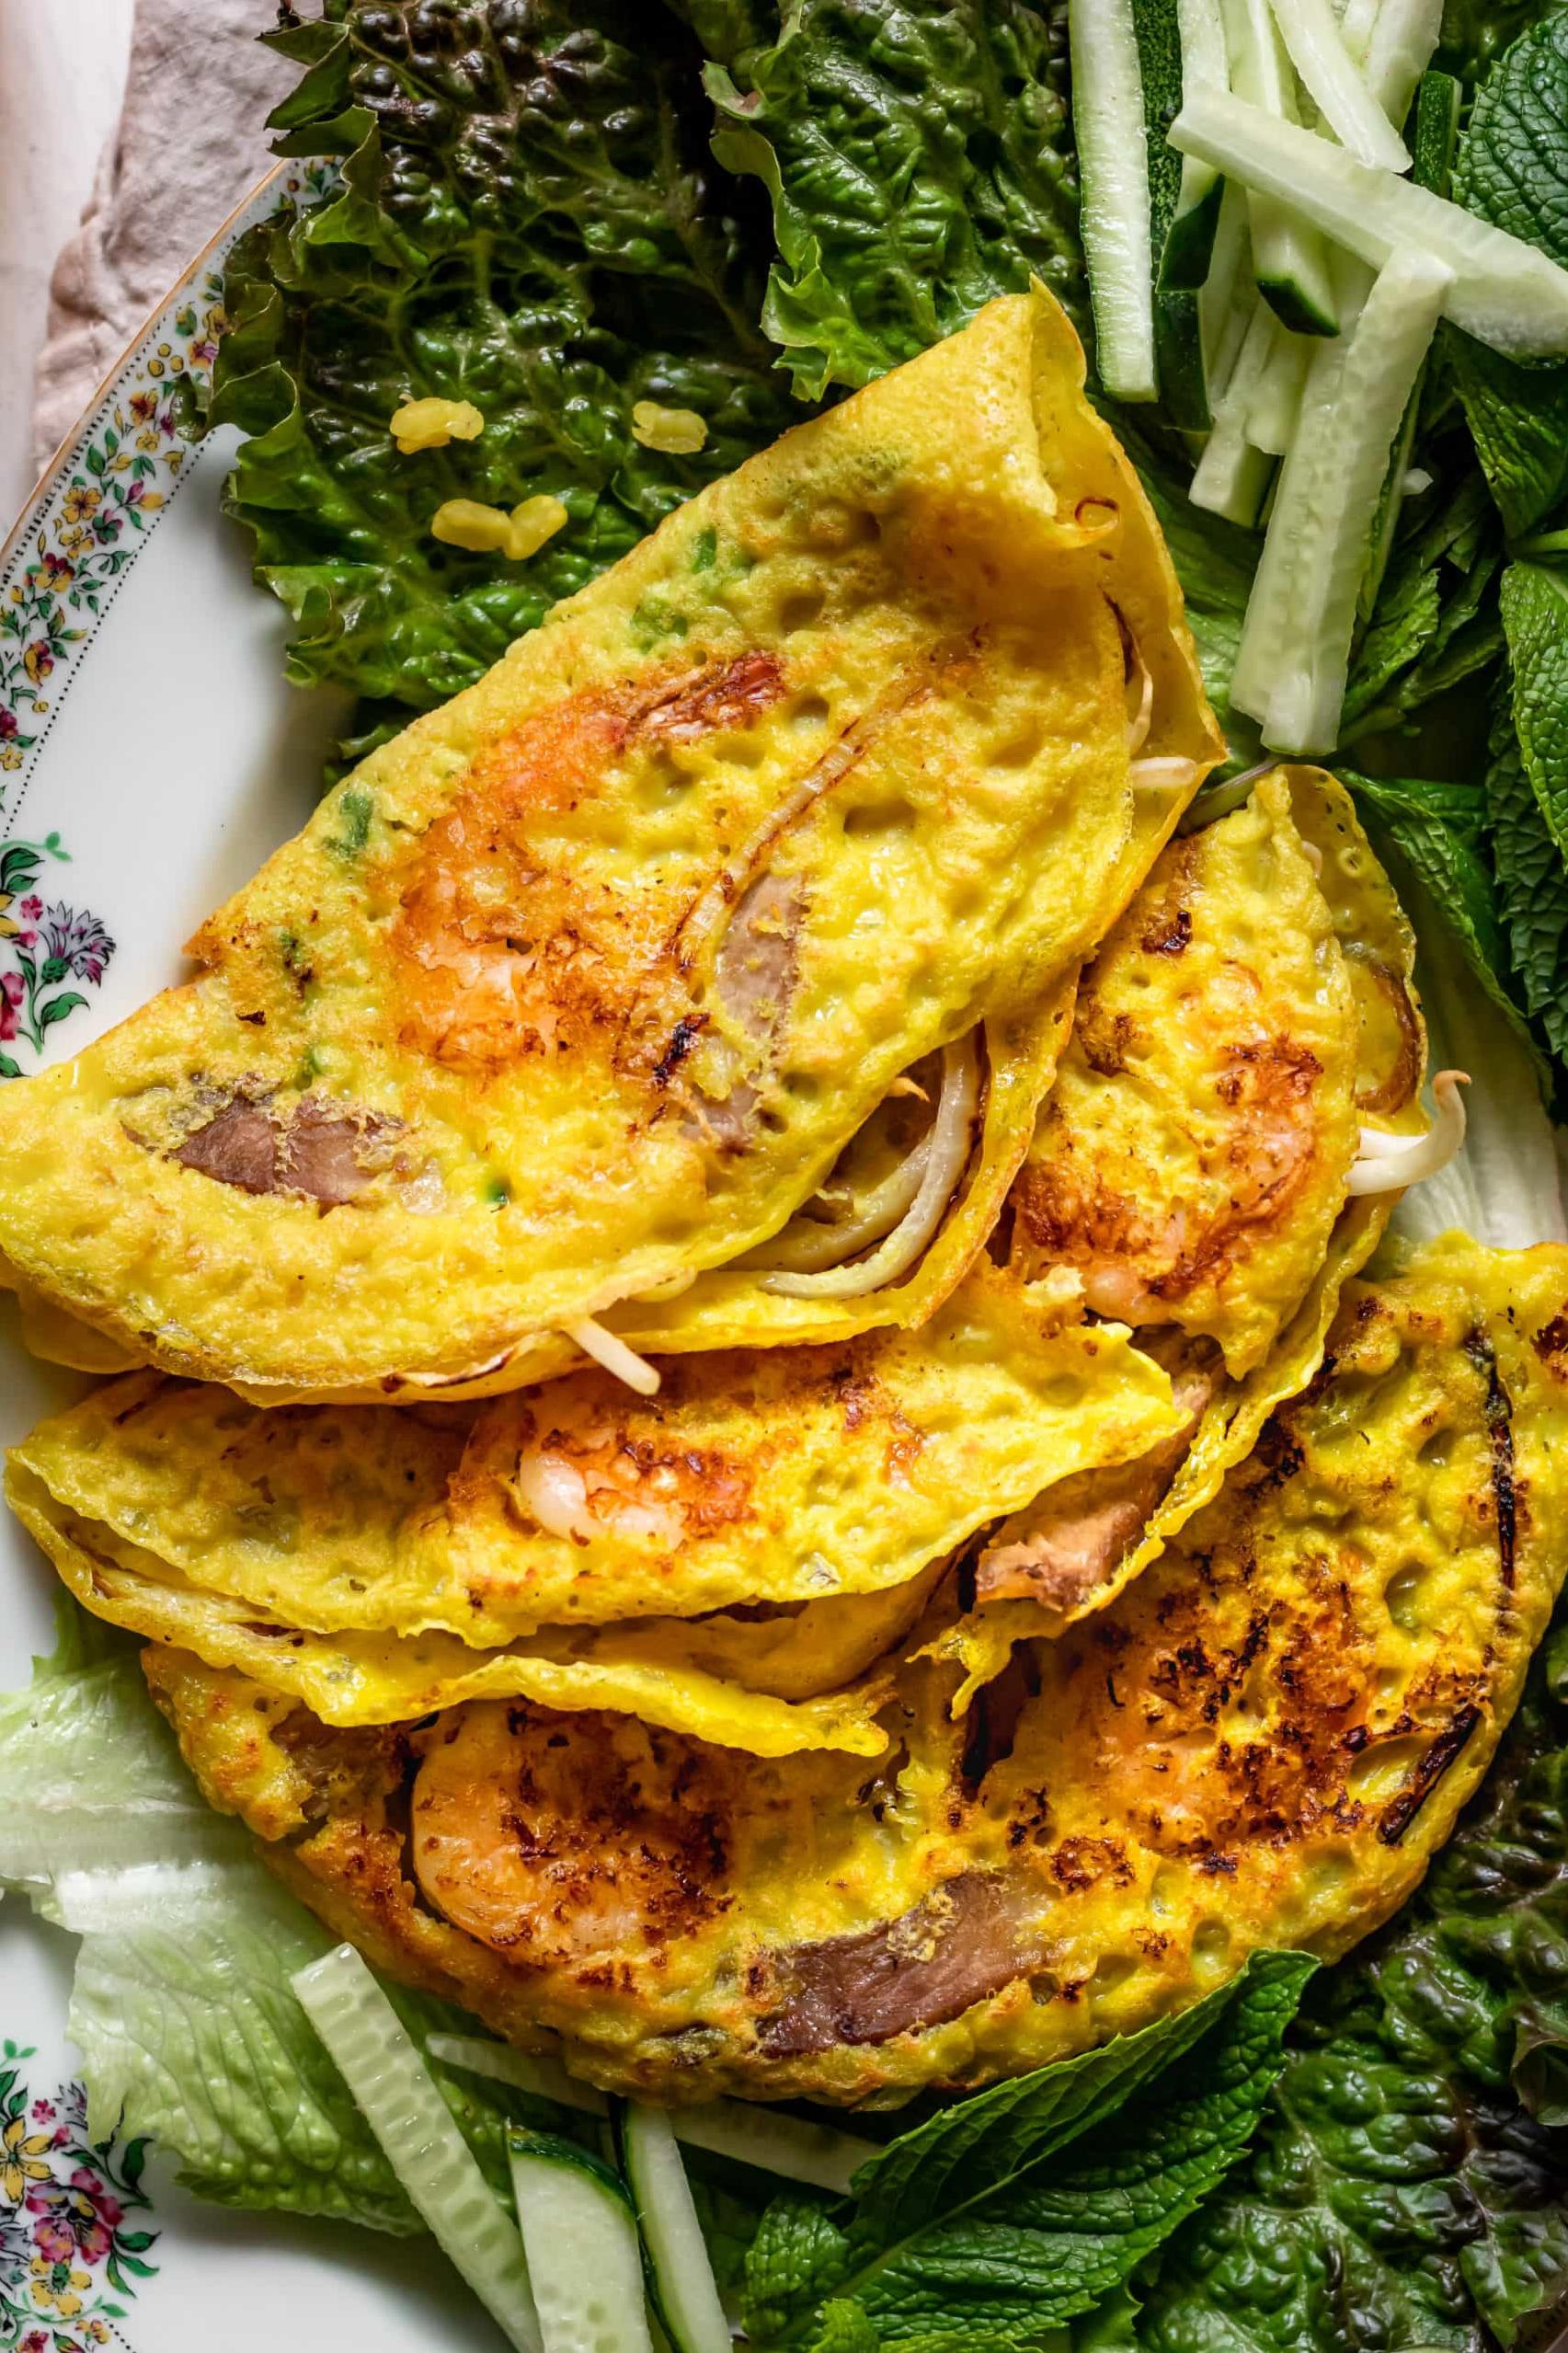  Bringing the taste of Vietnam to your plate with this hearty bean sprout pancake